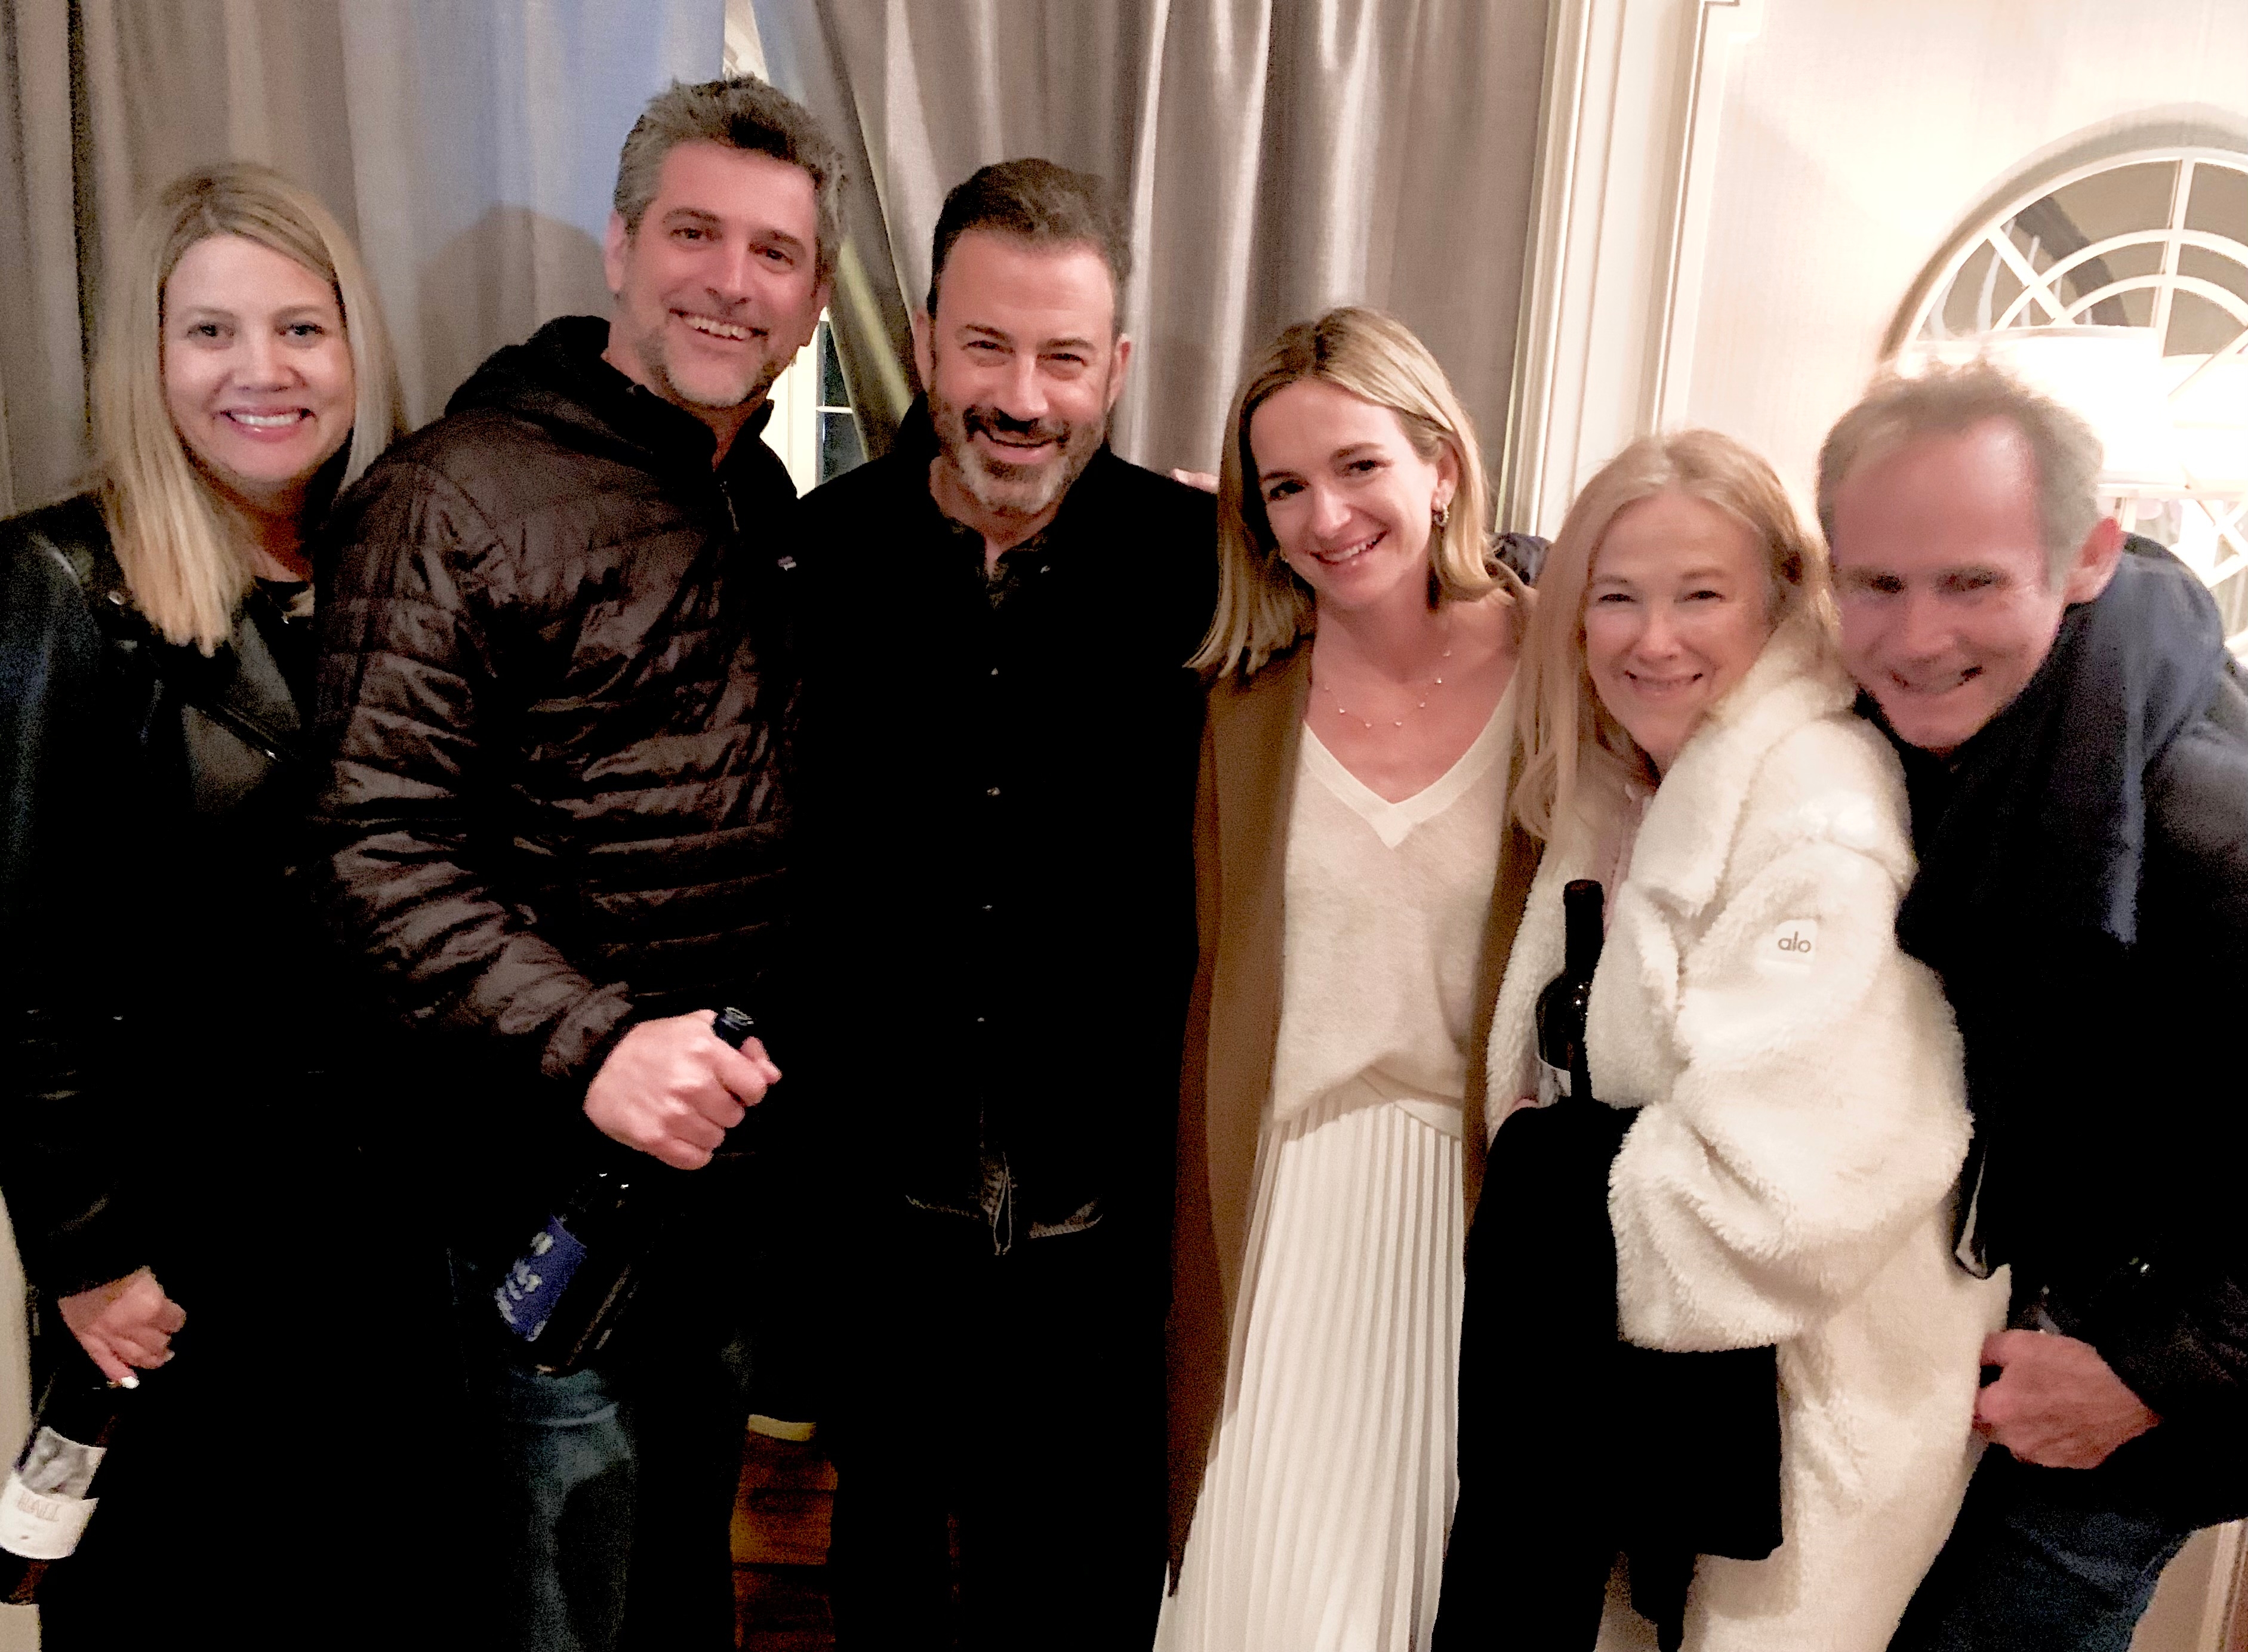 Left to right: Veronika Zappelli, WALT GM & HALL VP Sales Jeff Zappelli; Jimmy Kimmel and wife Molly McNearney; Catherine O'Hara and husband Beau Welch.